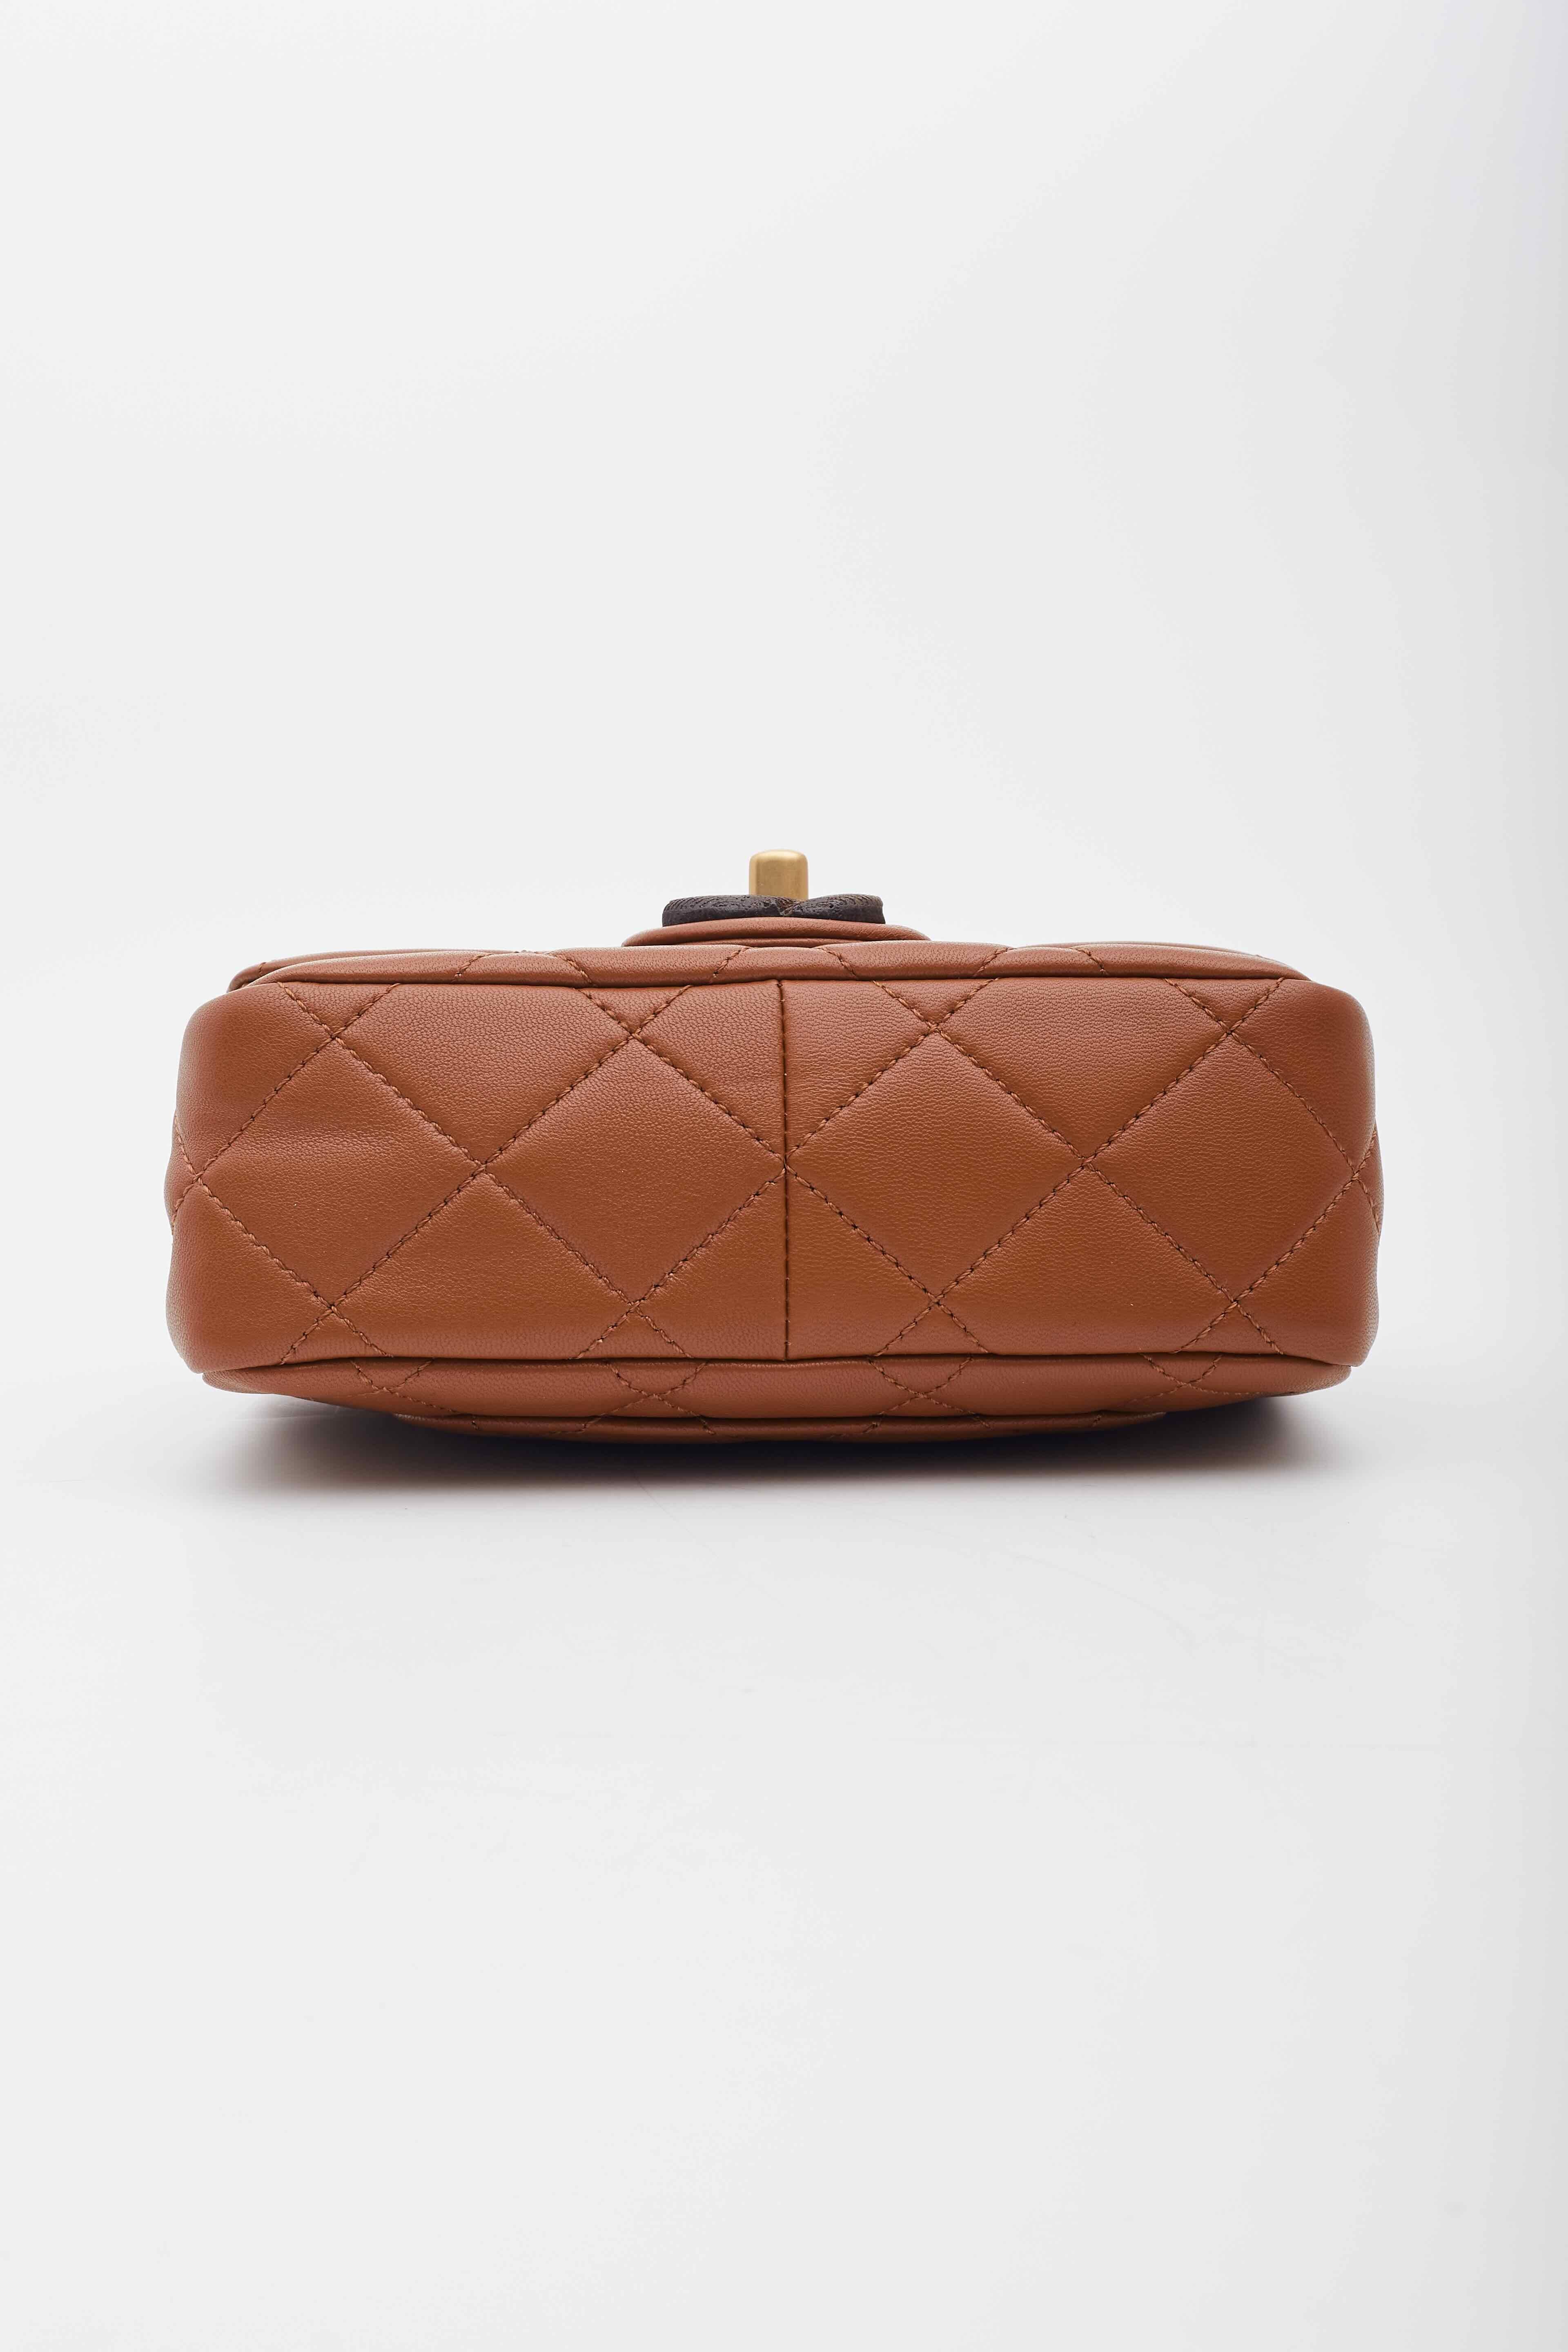 Chanel Lambskin Brown Wenge Wood Mini Flap Bag In Excellent Condition For Sale In Montreal, Quebec